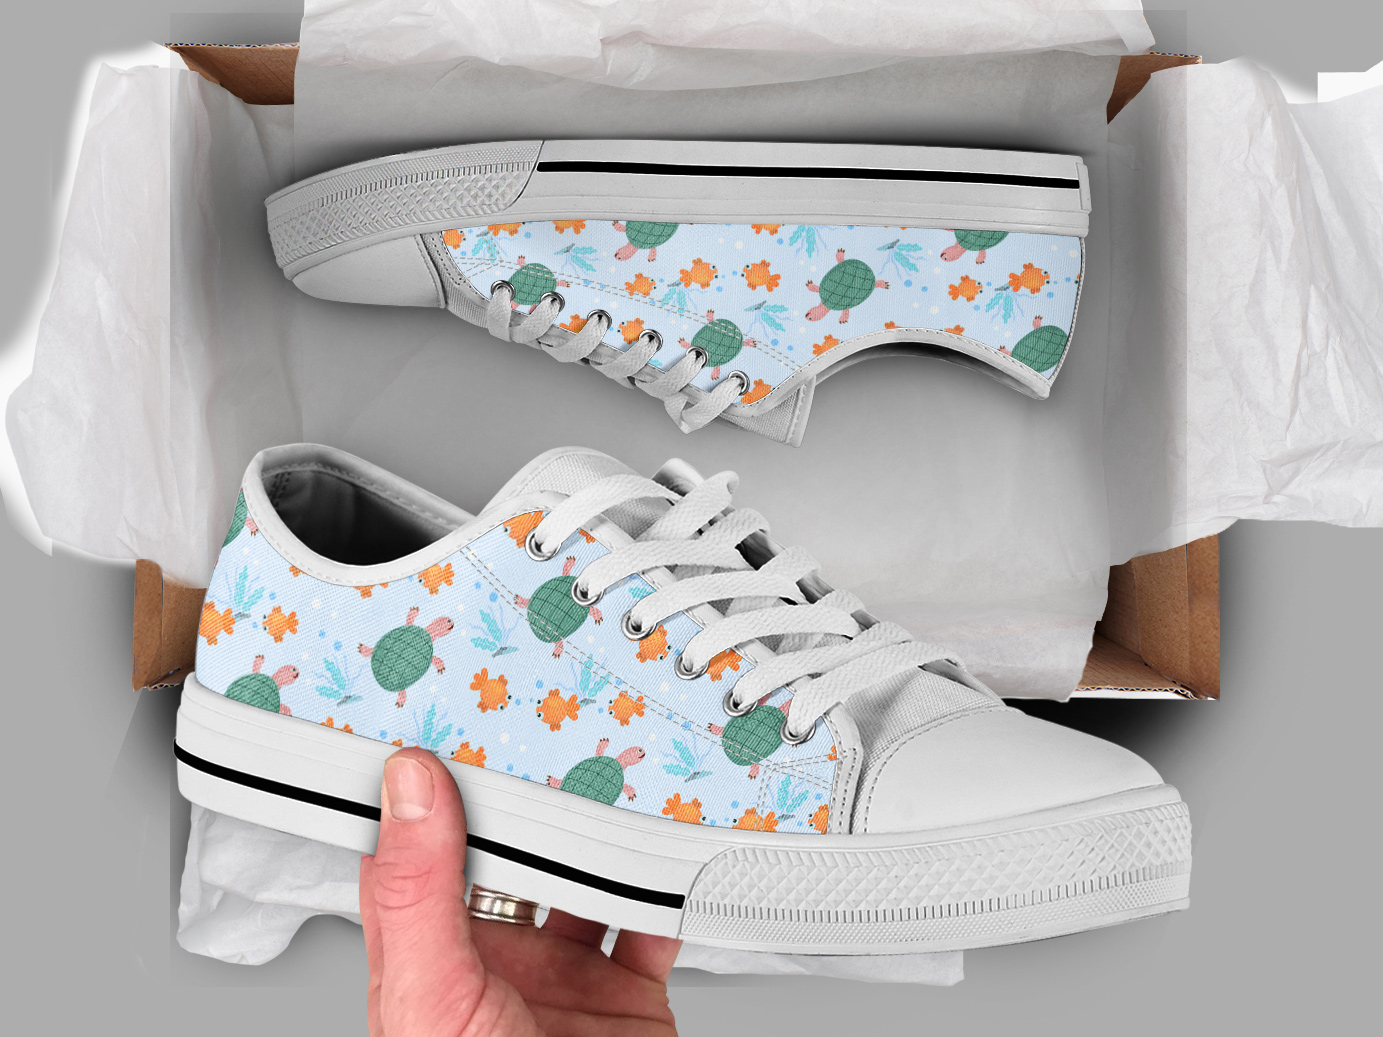 Turtle Fish Shoes | Custom Low Tops Sneakers For Kids & Adults